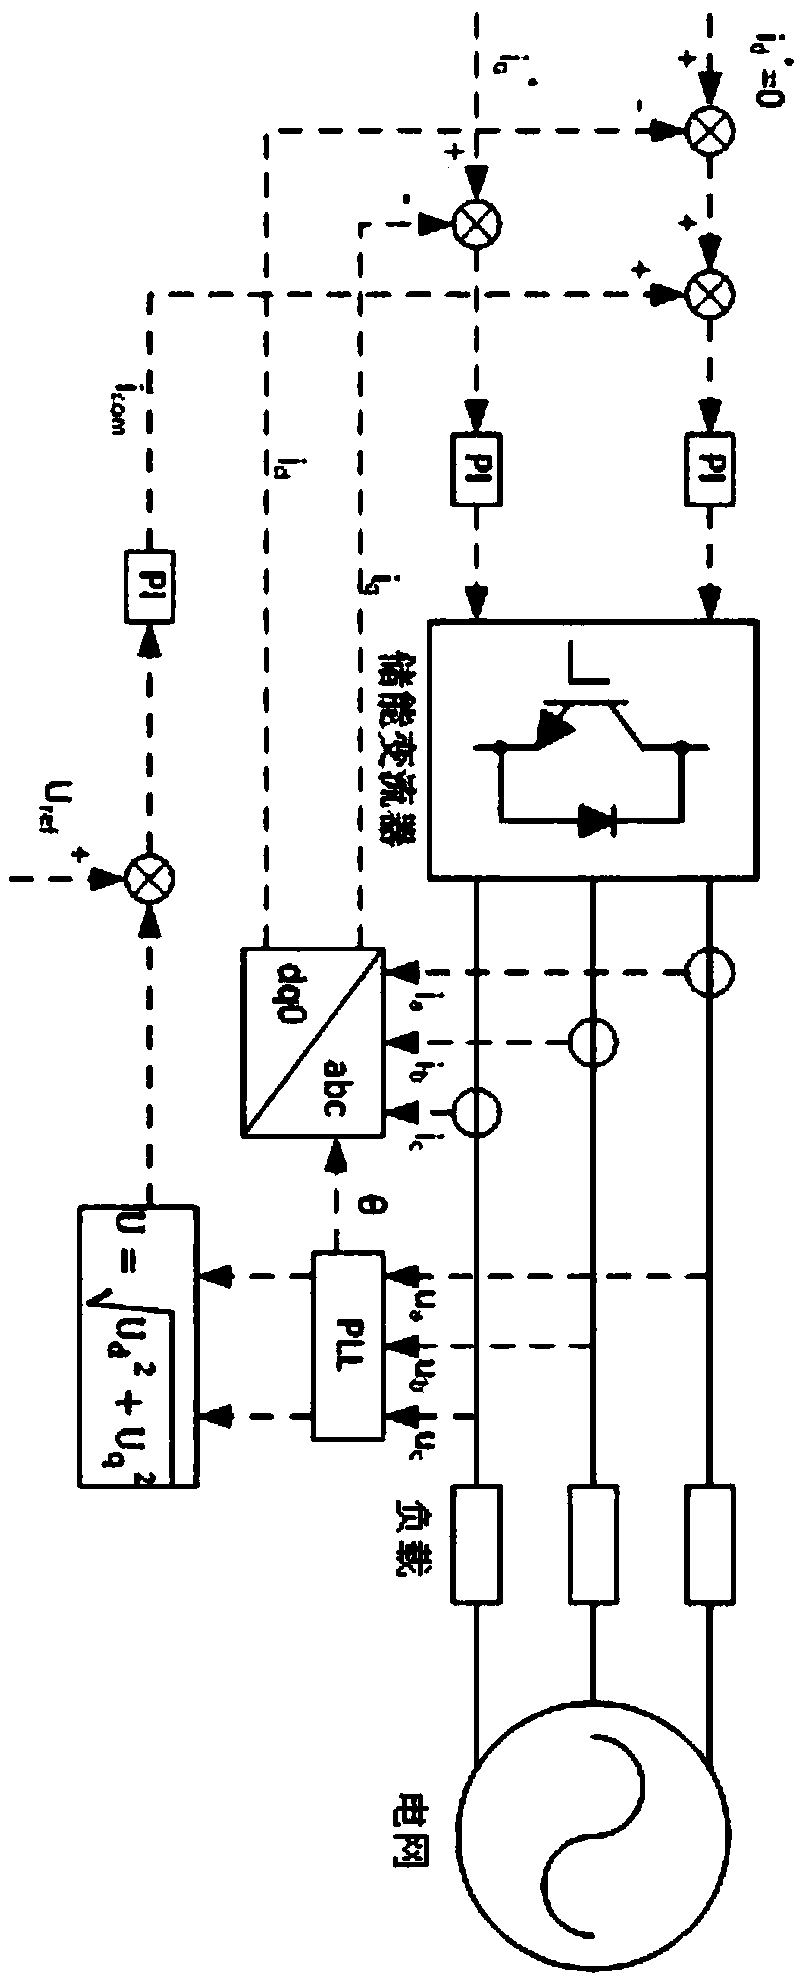 Voltage fluctuation regulation method for distributed photovoltaic energy storage microgrid system